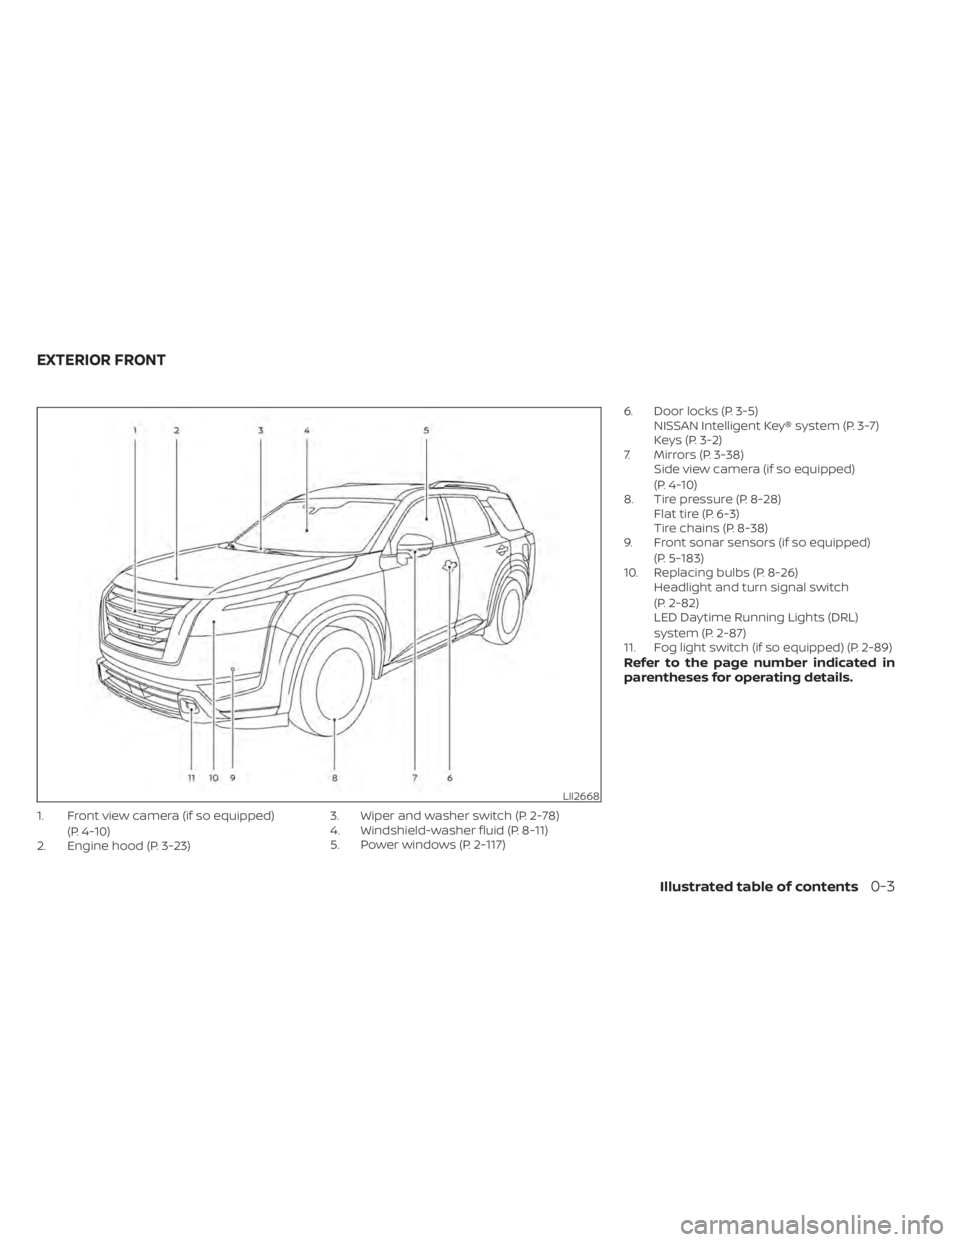 NISSAN PATHFINDER 2023 User Guide 1. Front view camera (if so equipped)(P. 4-10)
2. Engine hood (P. 3-23) 3. Wiper and washer switch (P. 2-78)
4. Windshield-washer fluid (P. 8-11)
5. Power windows (P. 2-117)6. Door locks (P. 3-5)
NISS